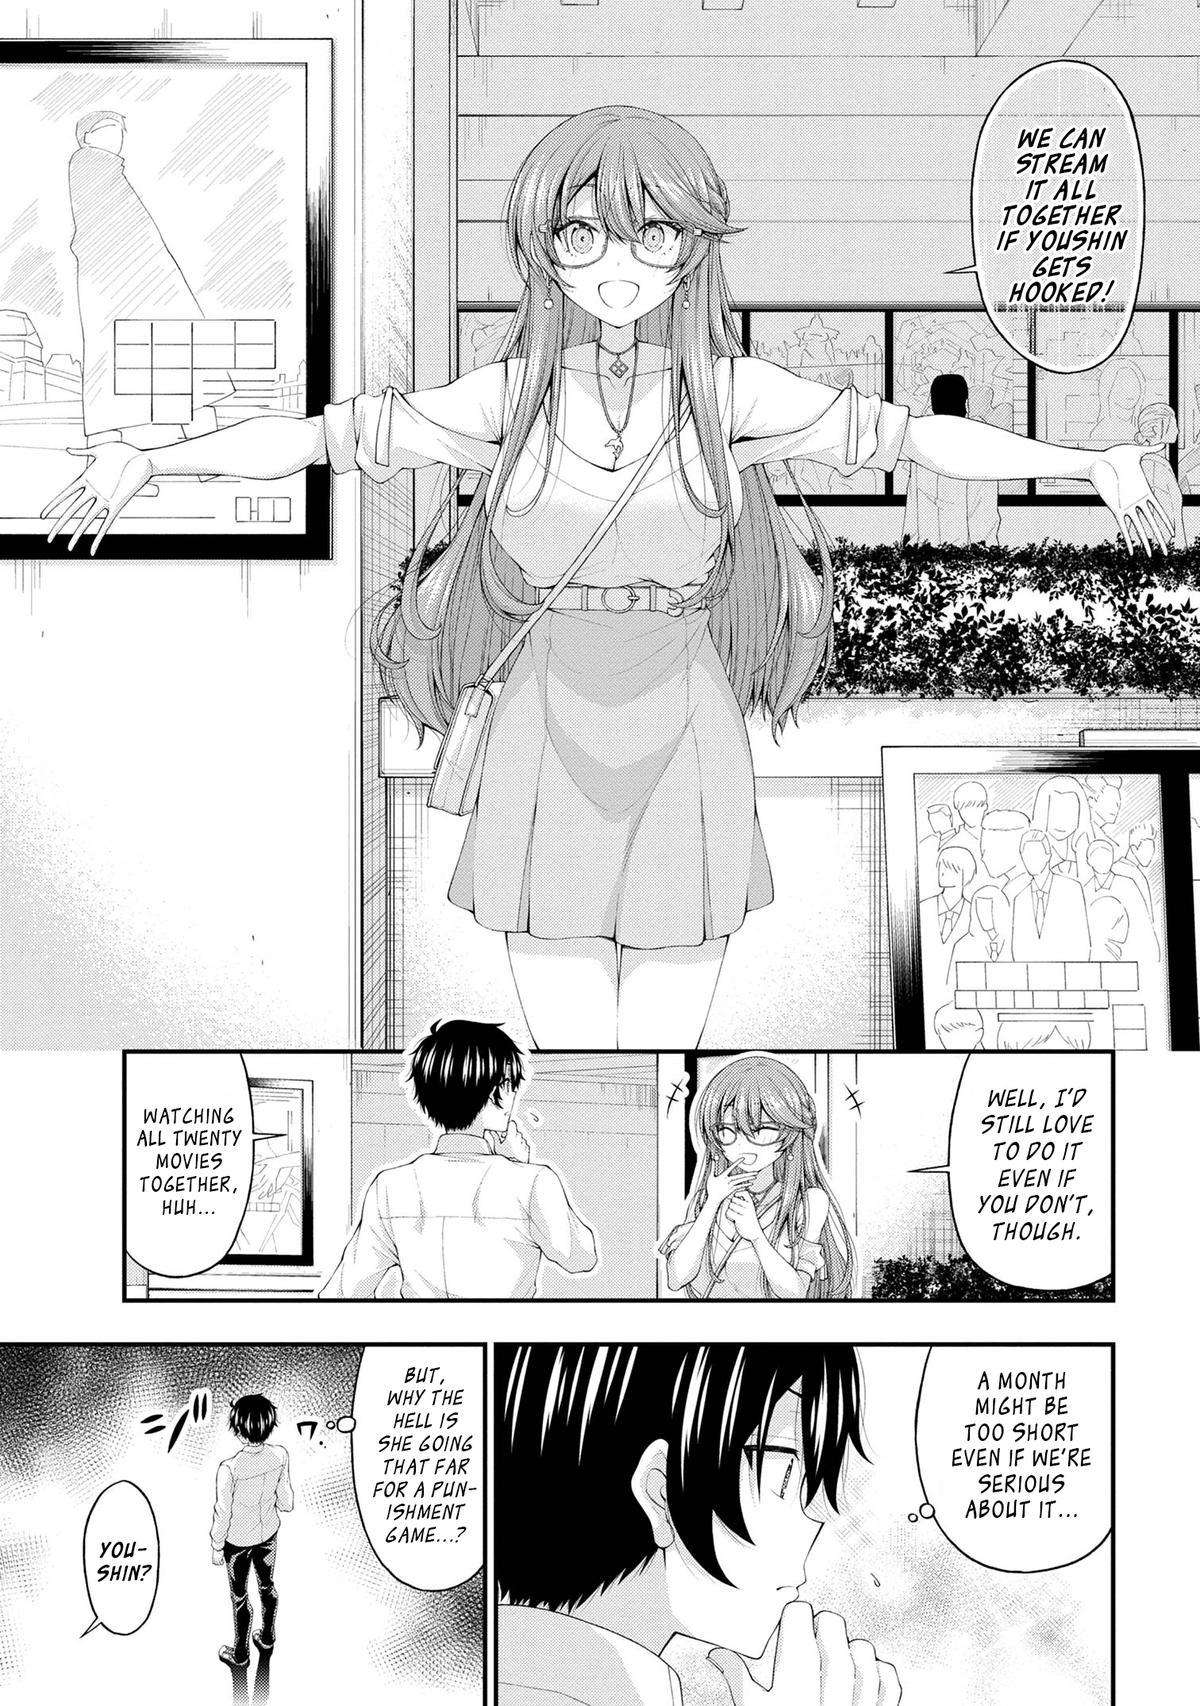 The Gal Who Was Meant to Confess to Me as a Game Punishment - chapter 10 - #5